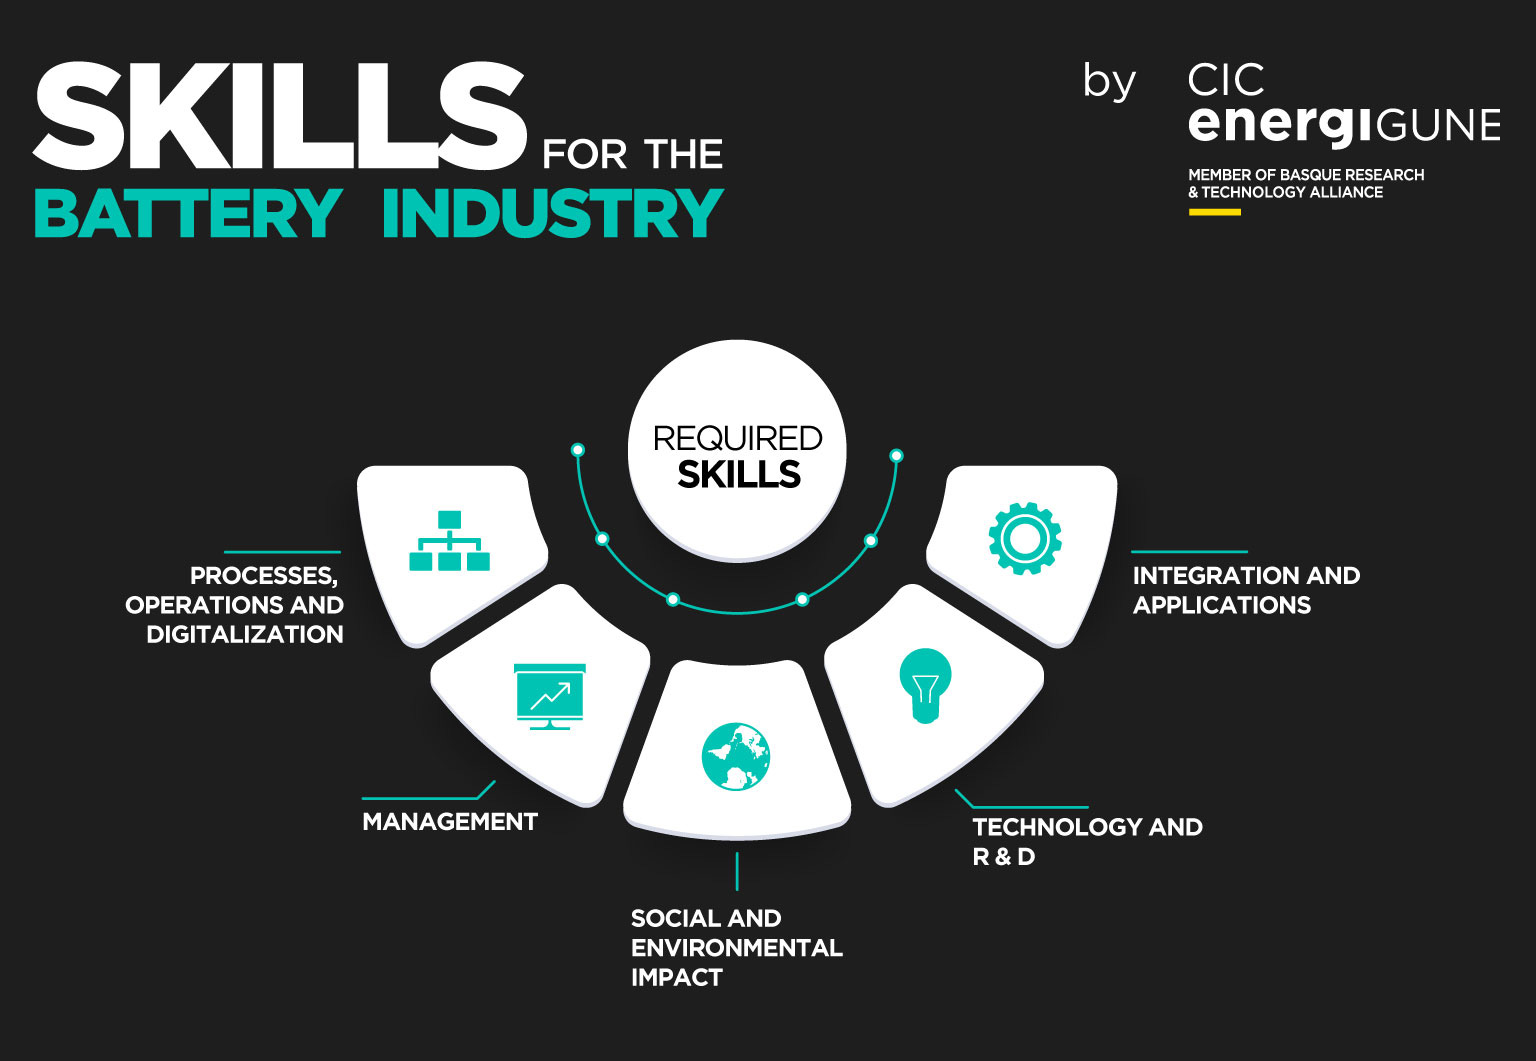 Required skills for the battery industry: processes, operations and digitalization, management, social and environmental impact, technology and R&D, and integration and applications.